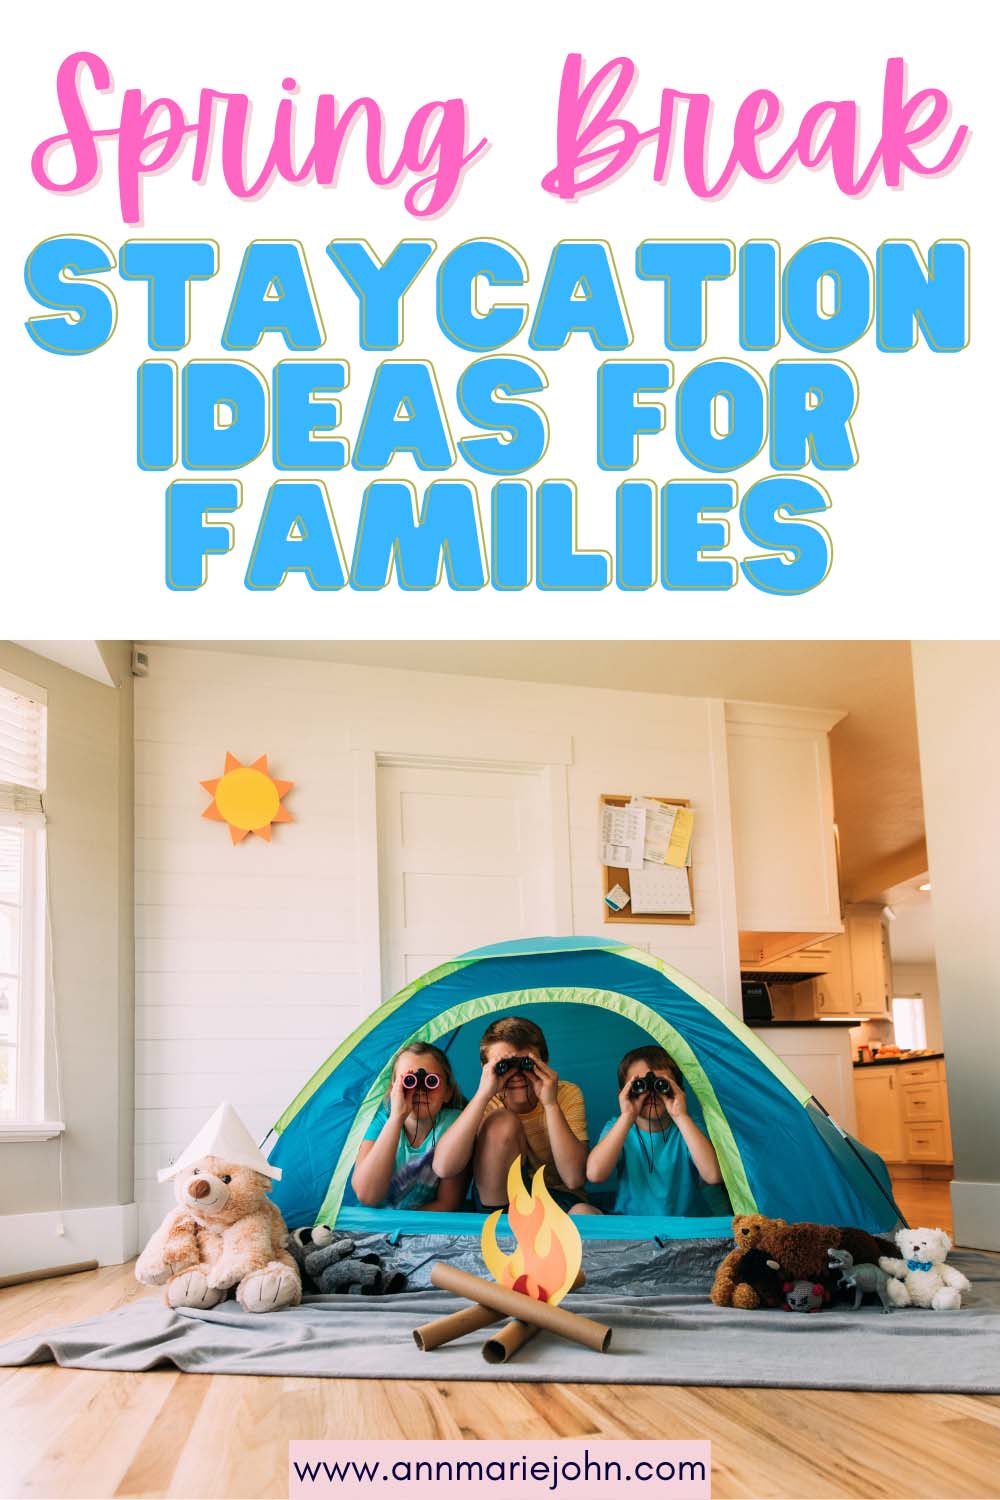 Spring Break Staycation Ideas for Families